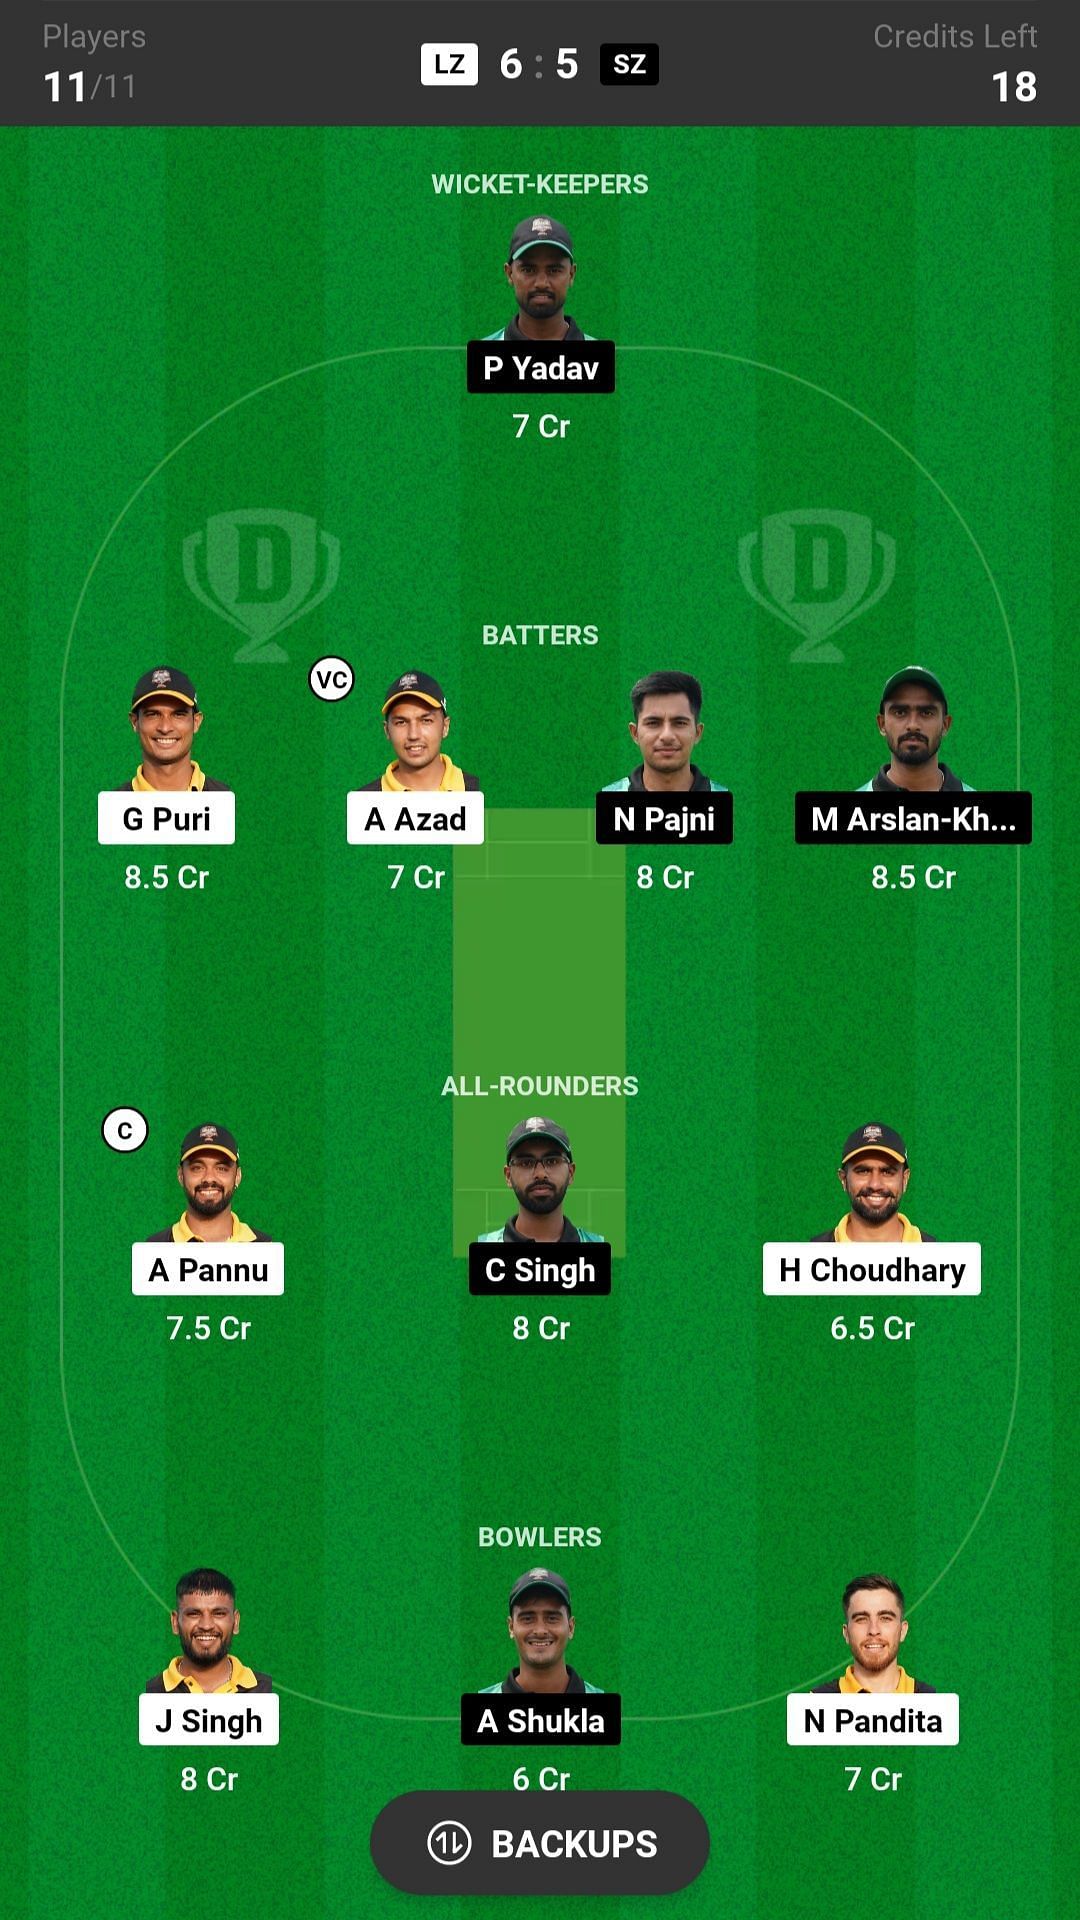 LZ vs SZ Dream11 Prediction: Fantasy Cricket Tips, Today’s Playing 11 and Pitch Report for Shaheed